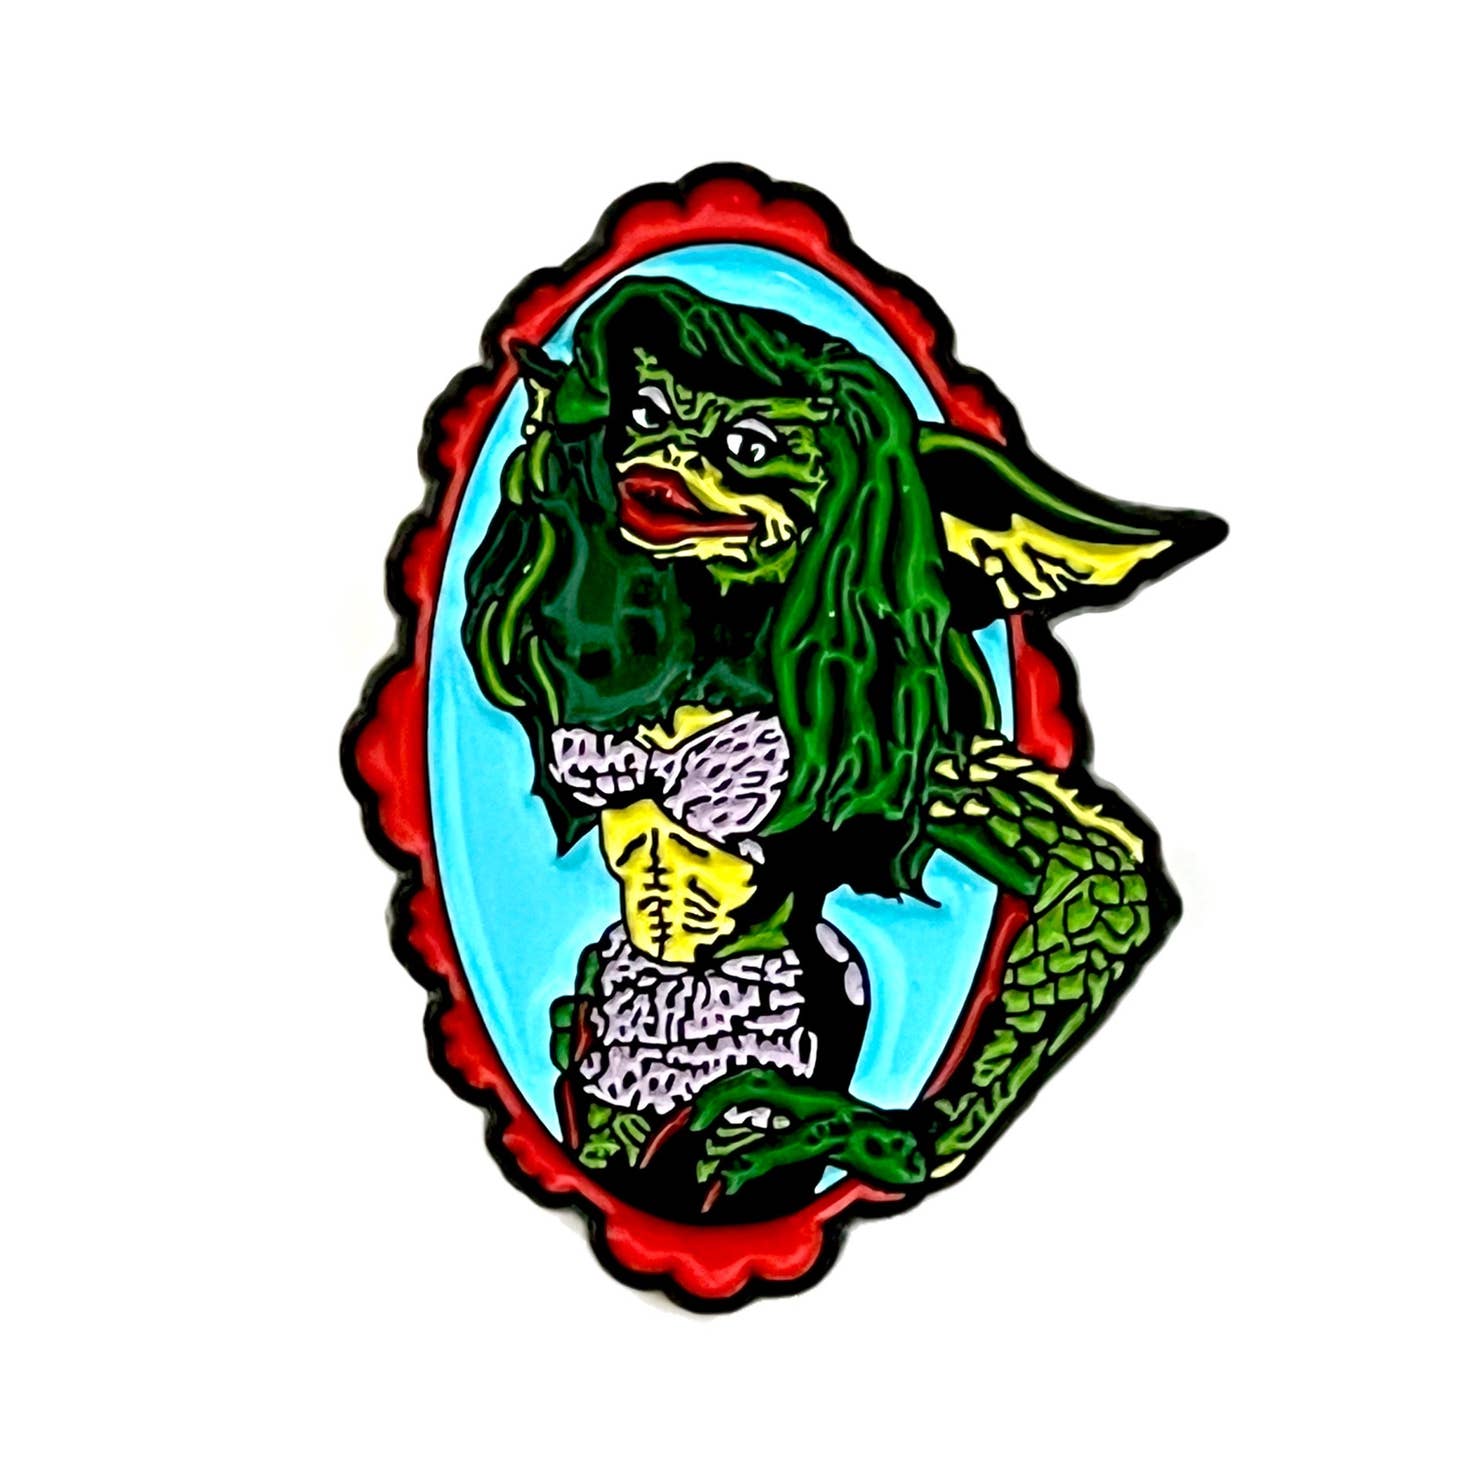 Colorful enamel pin of Greta from the movie Gremlins posed with one arm up in a red and blue oval frame 